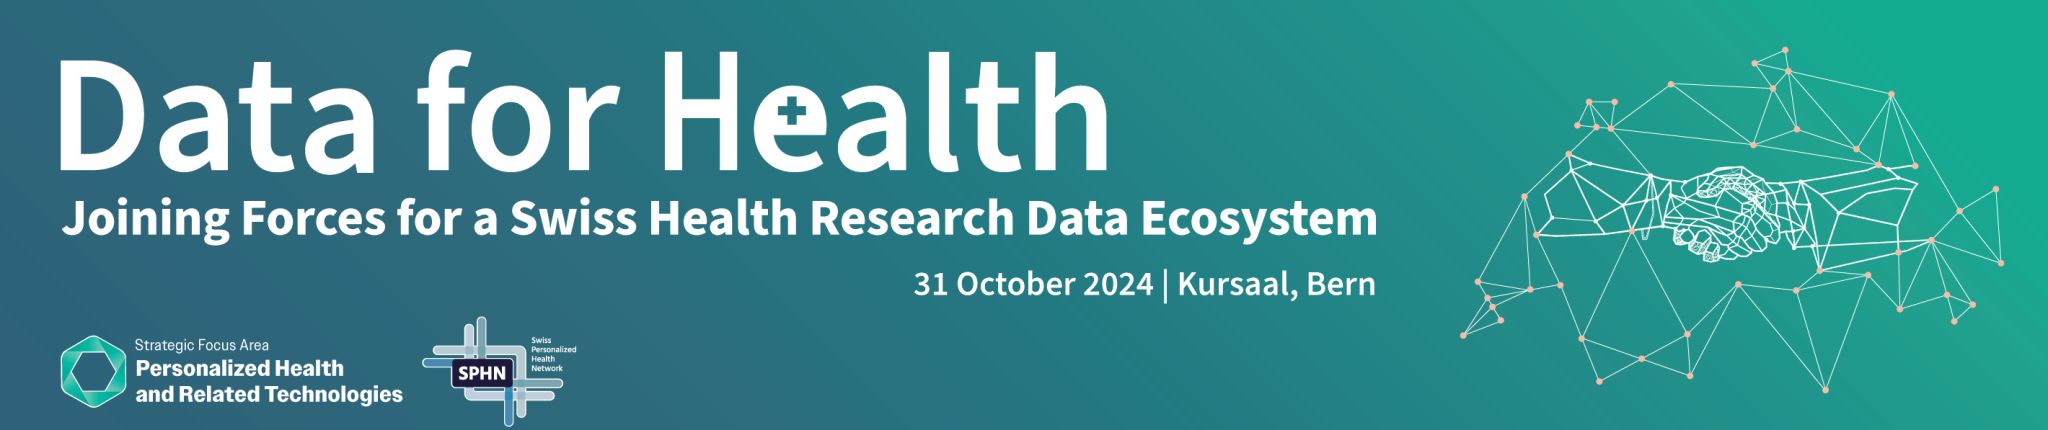 SAVE THE DATE: “Data for Health” symposium